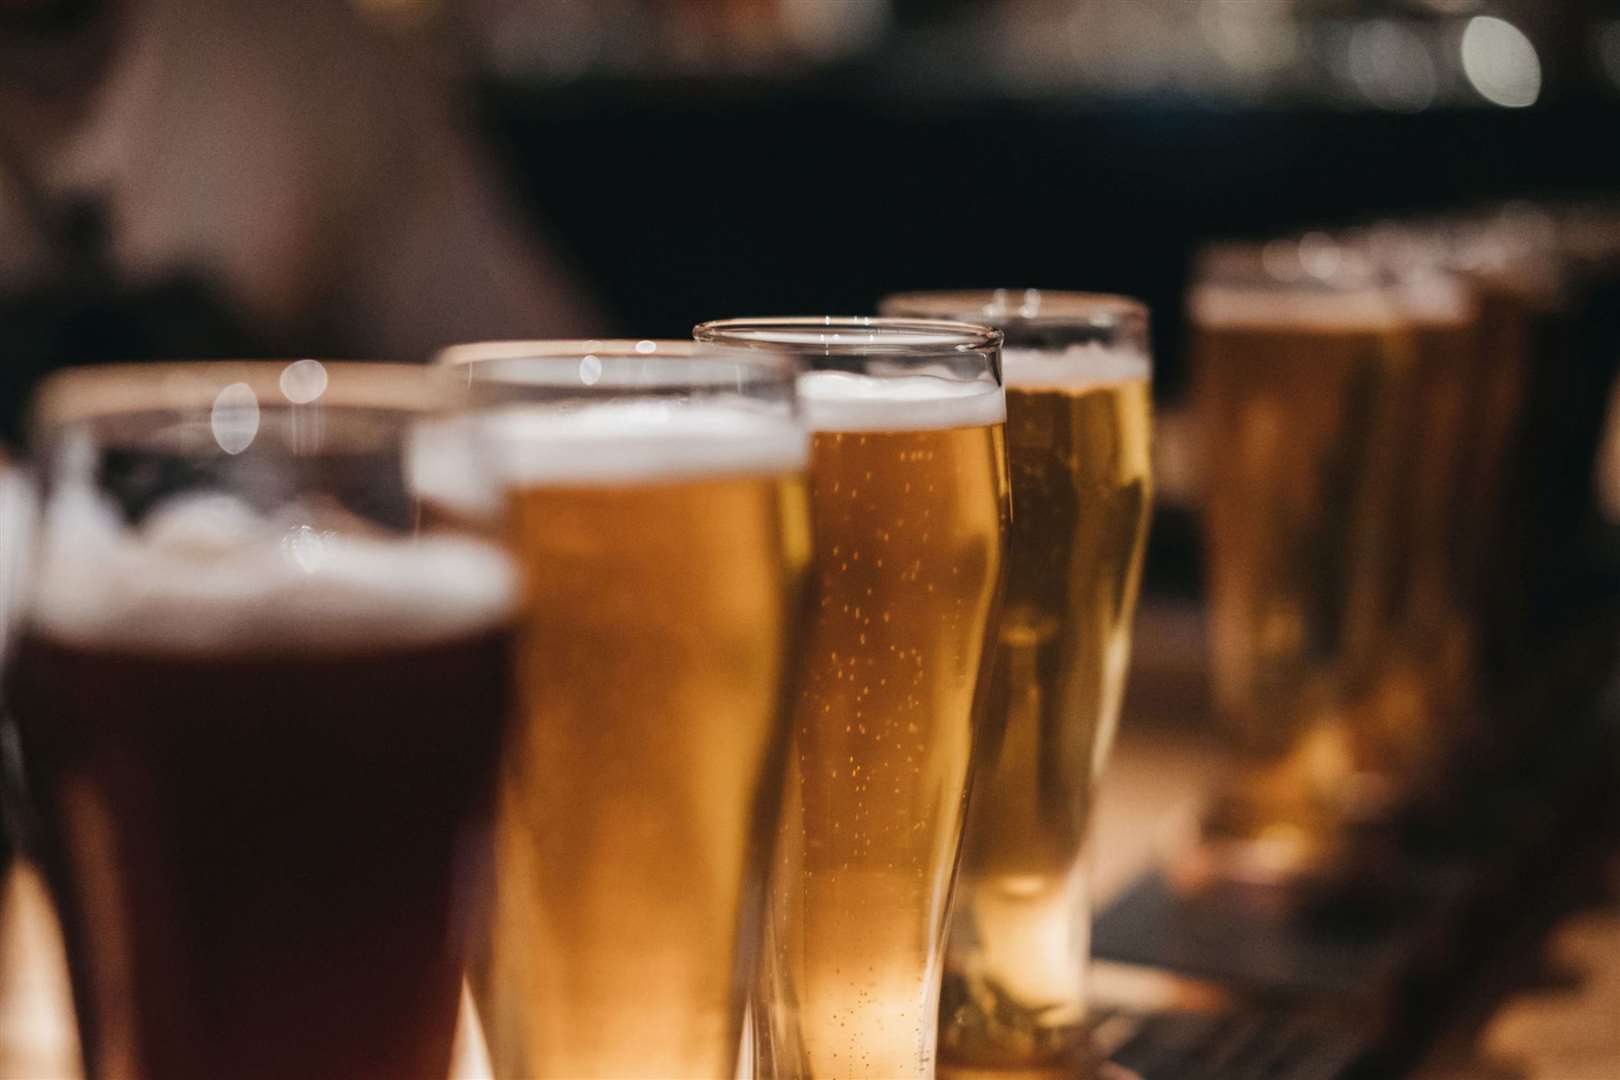 Pubs have adapted by delivering beer and food Picture: iStock/PA